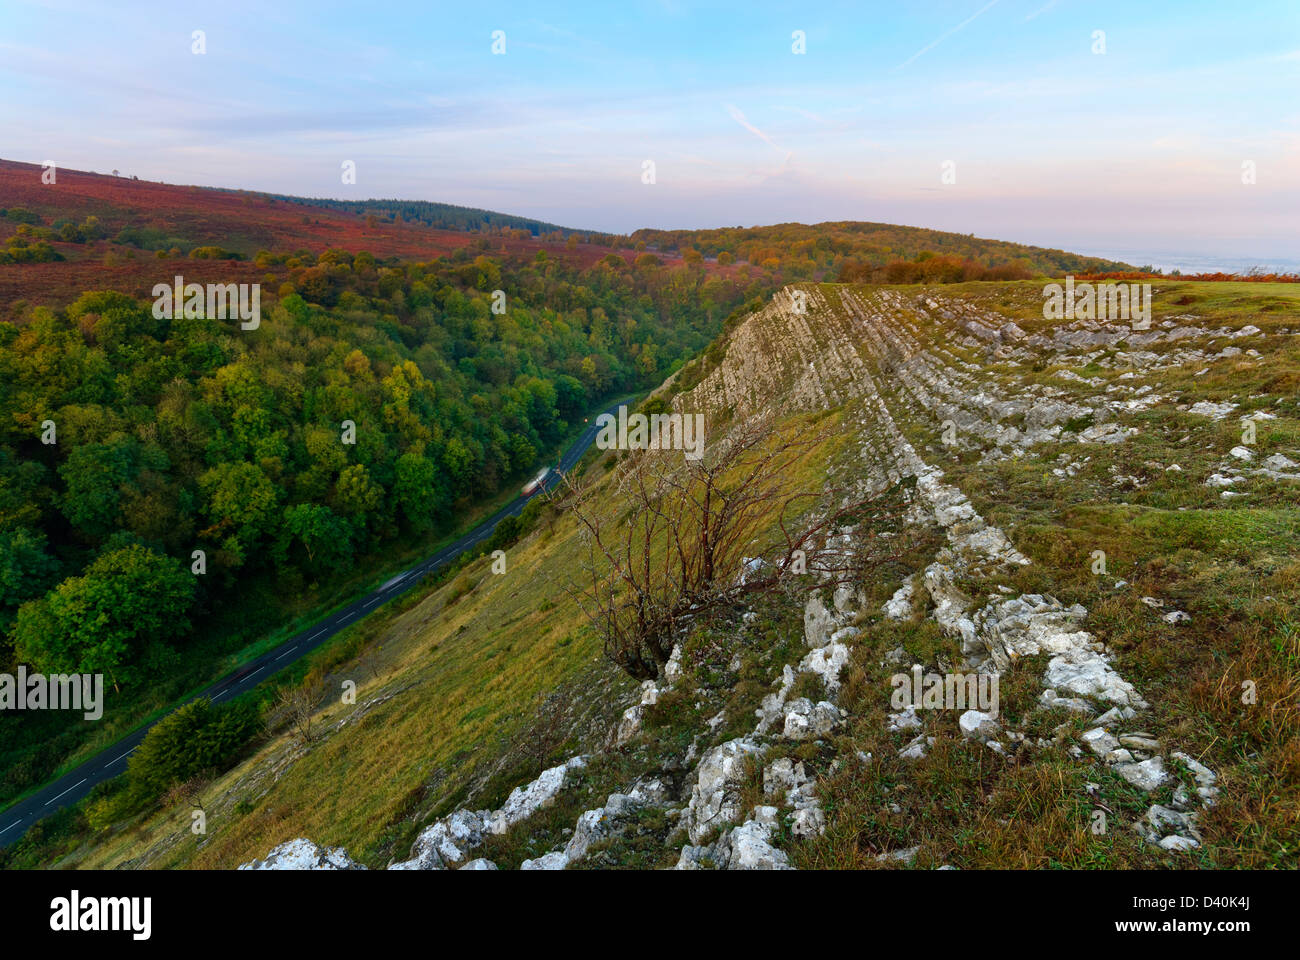 The Coombe above Burrington Coombe in the Mendip hills, Somerset with light traffic traveling on the B3134 in below the hills. Stock Photo